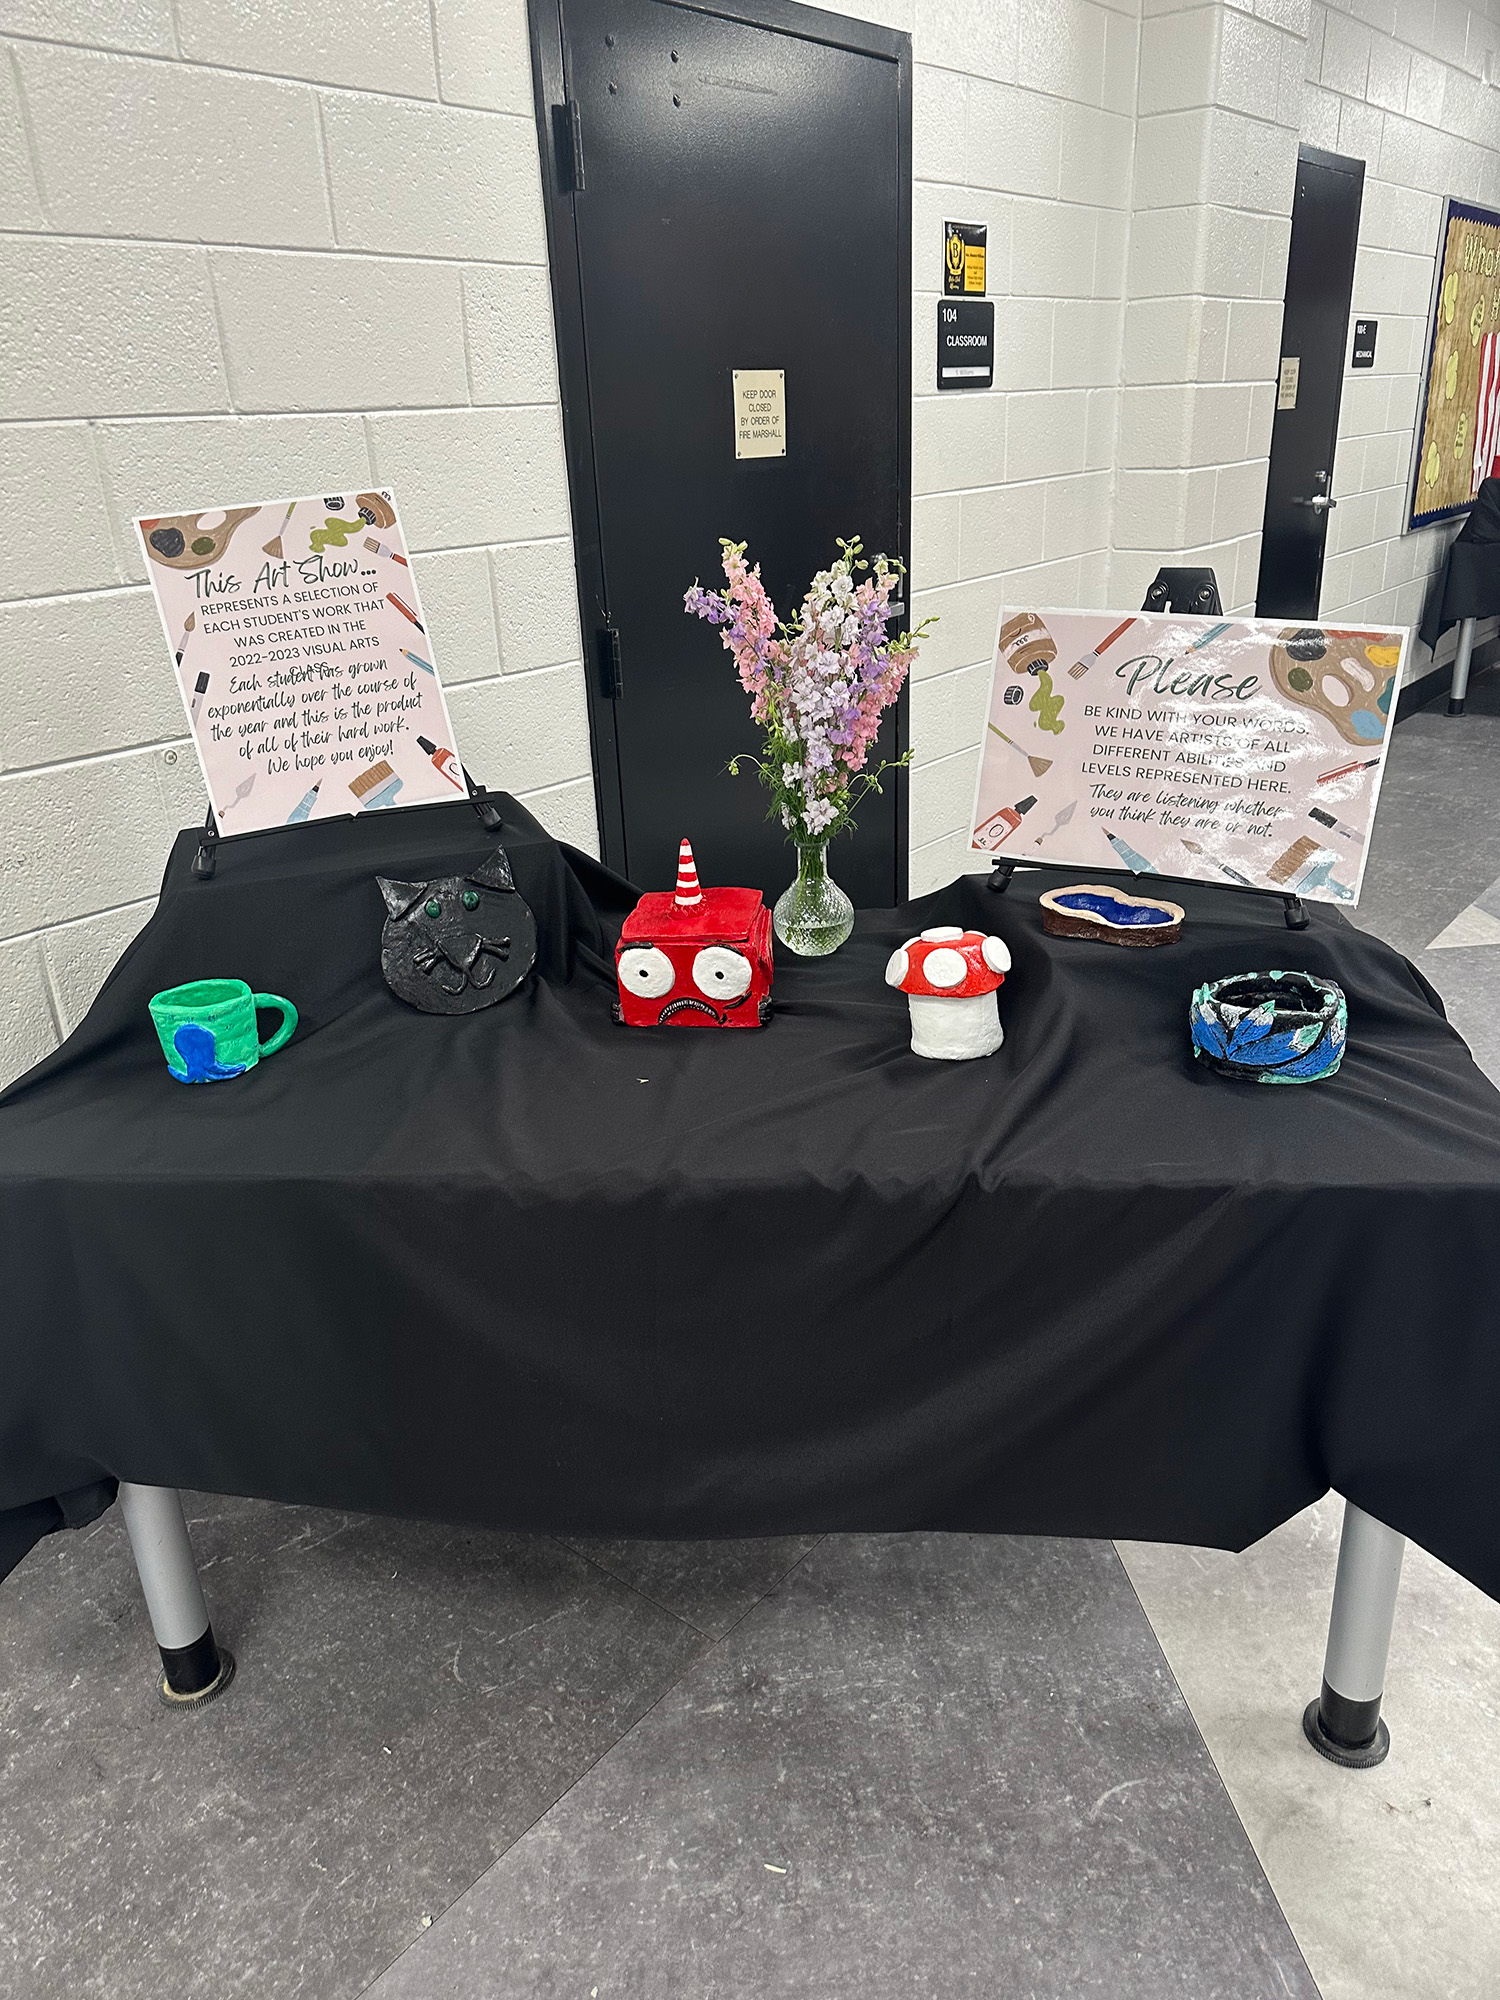 LCHS Art Show / Image of LCHS Art Show greeting table.